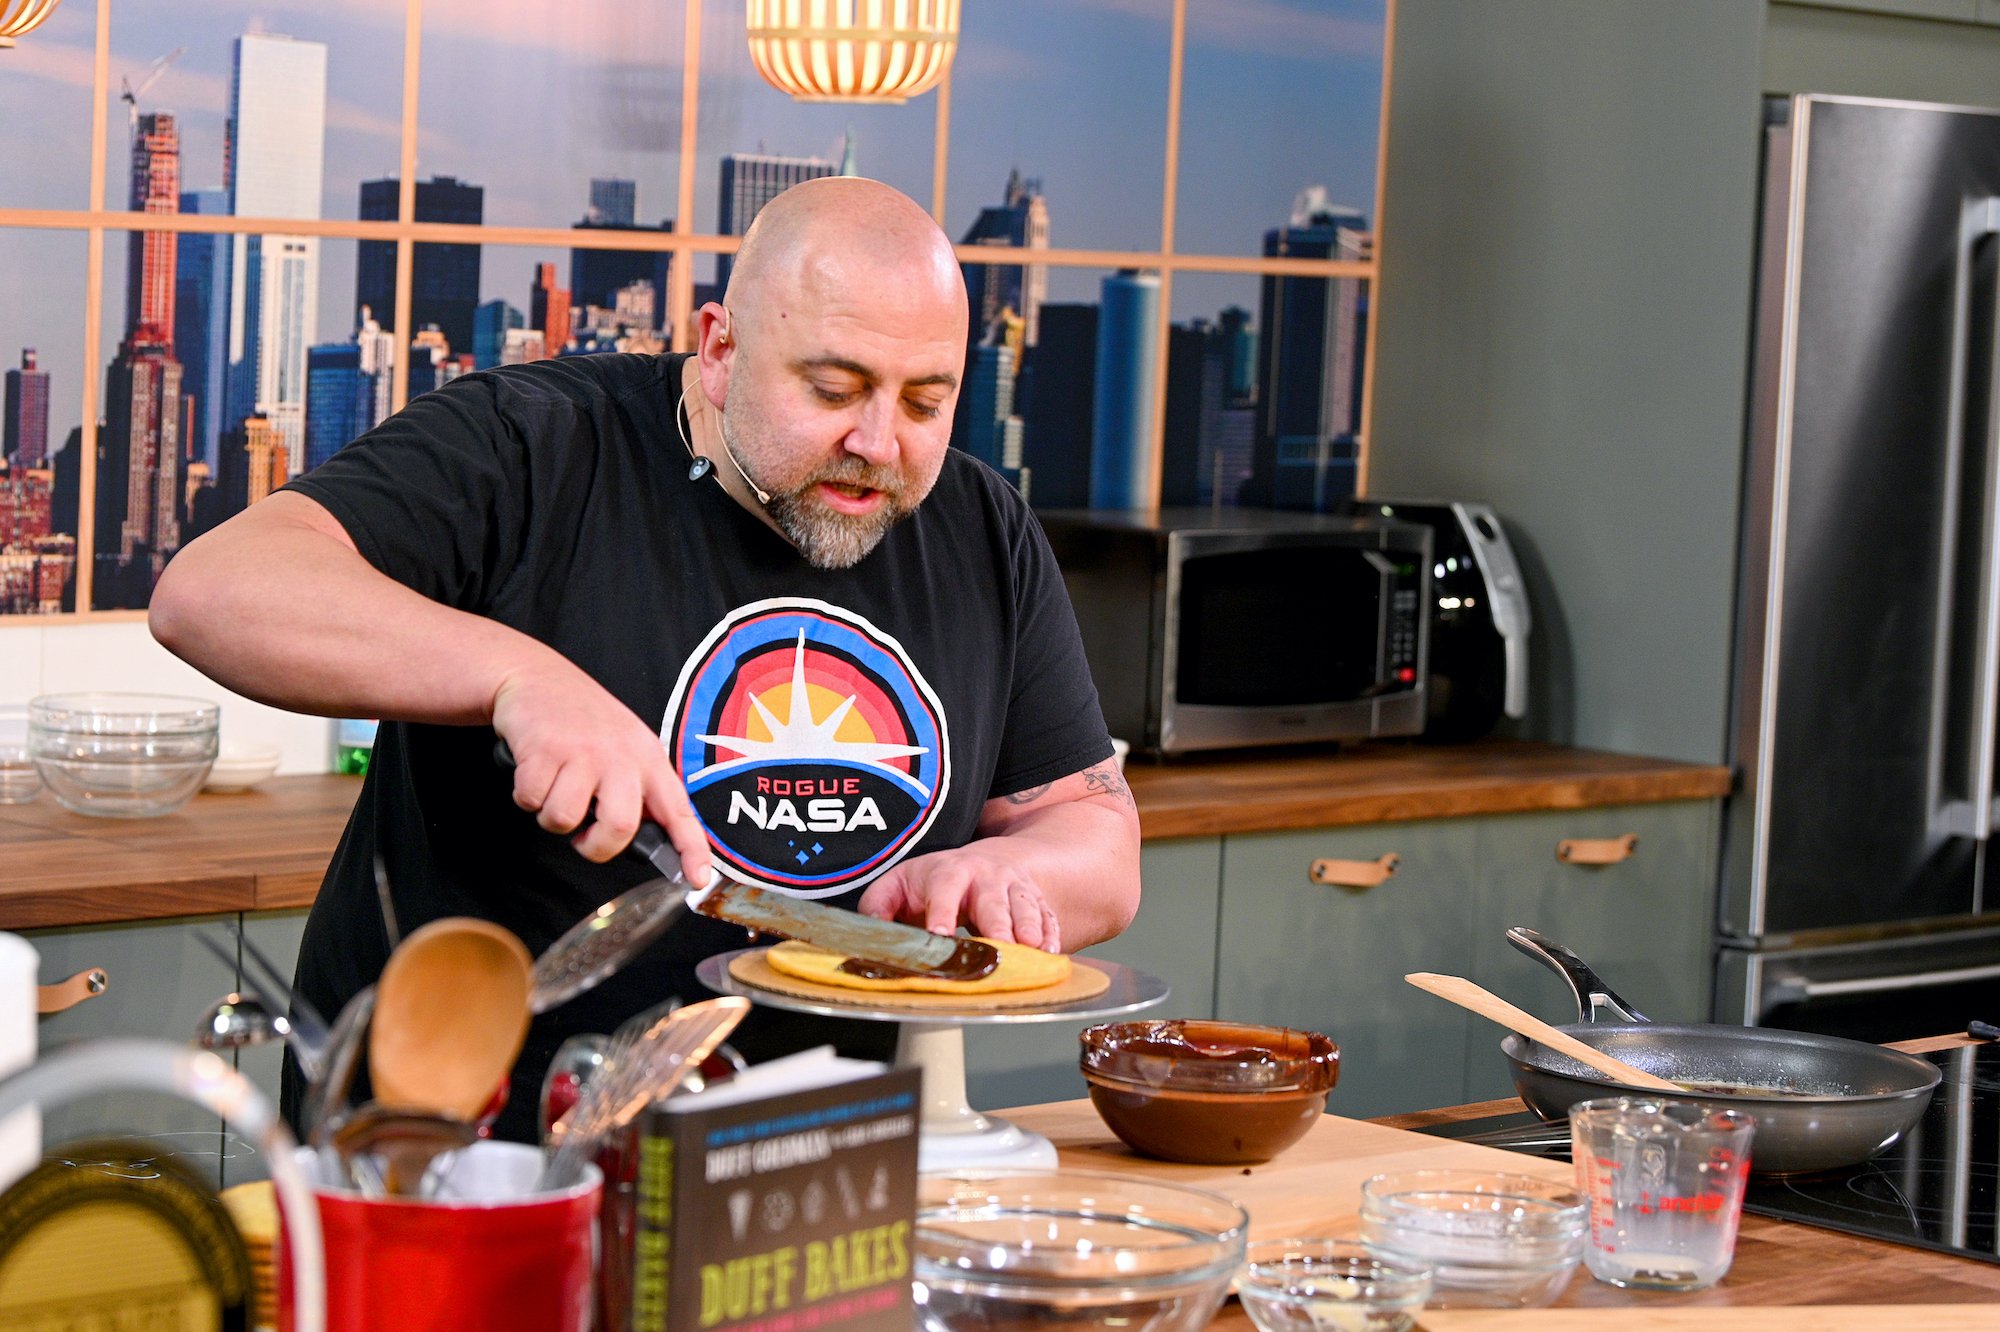 The Real Meaning Behind Duff Goldman's Hilarious Tattoos